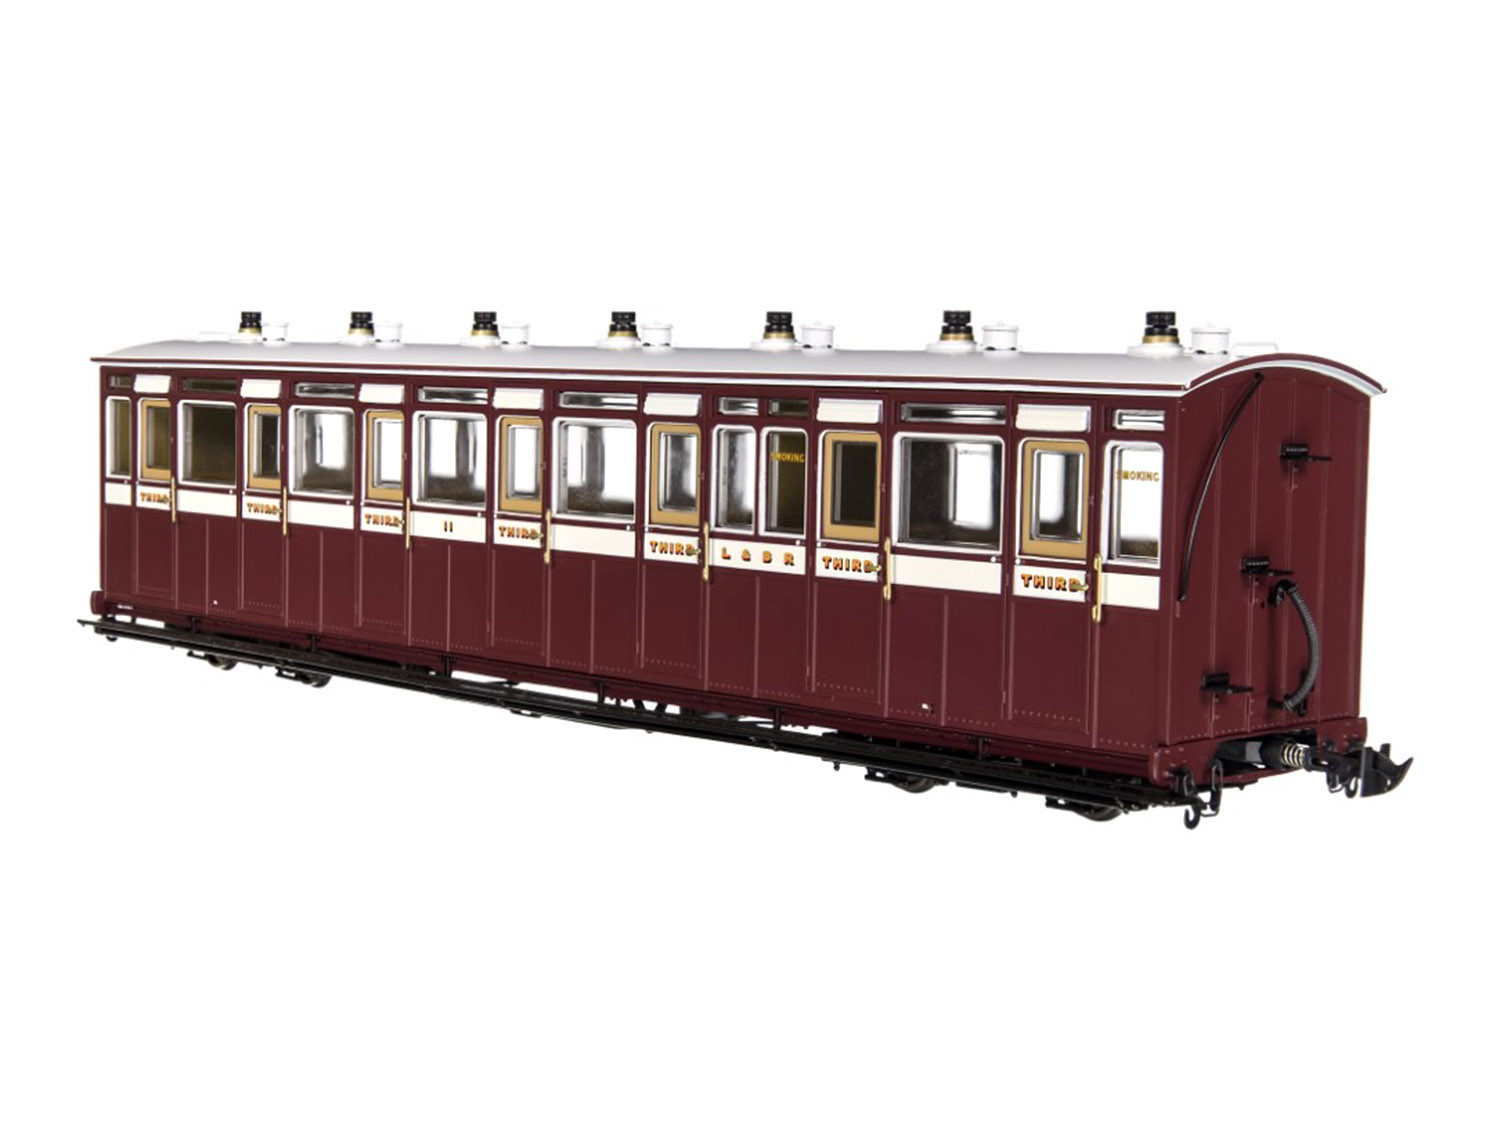 L&B Open 3rd Coach No.7 1901-1922 (DCC-Fitted)